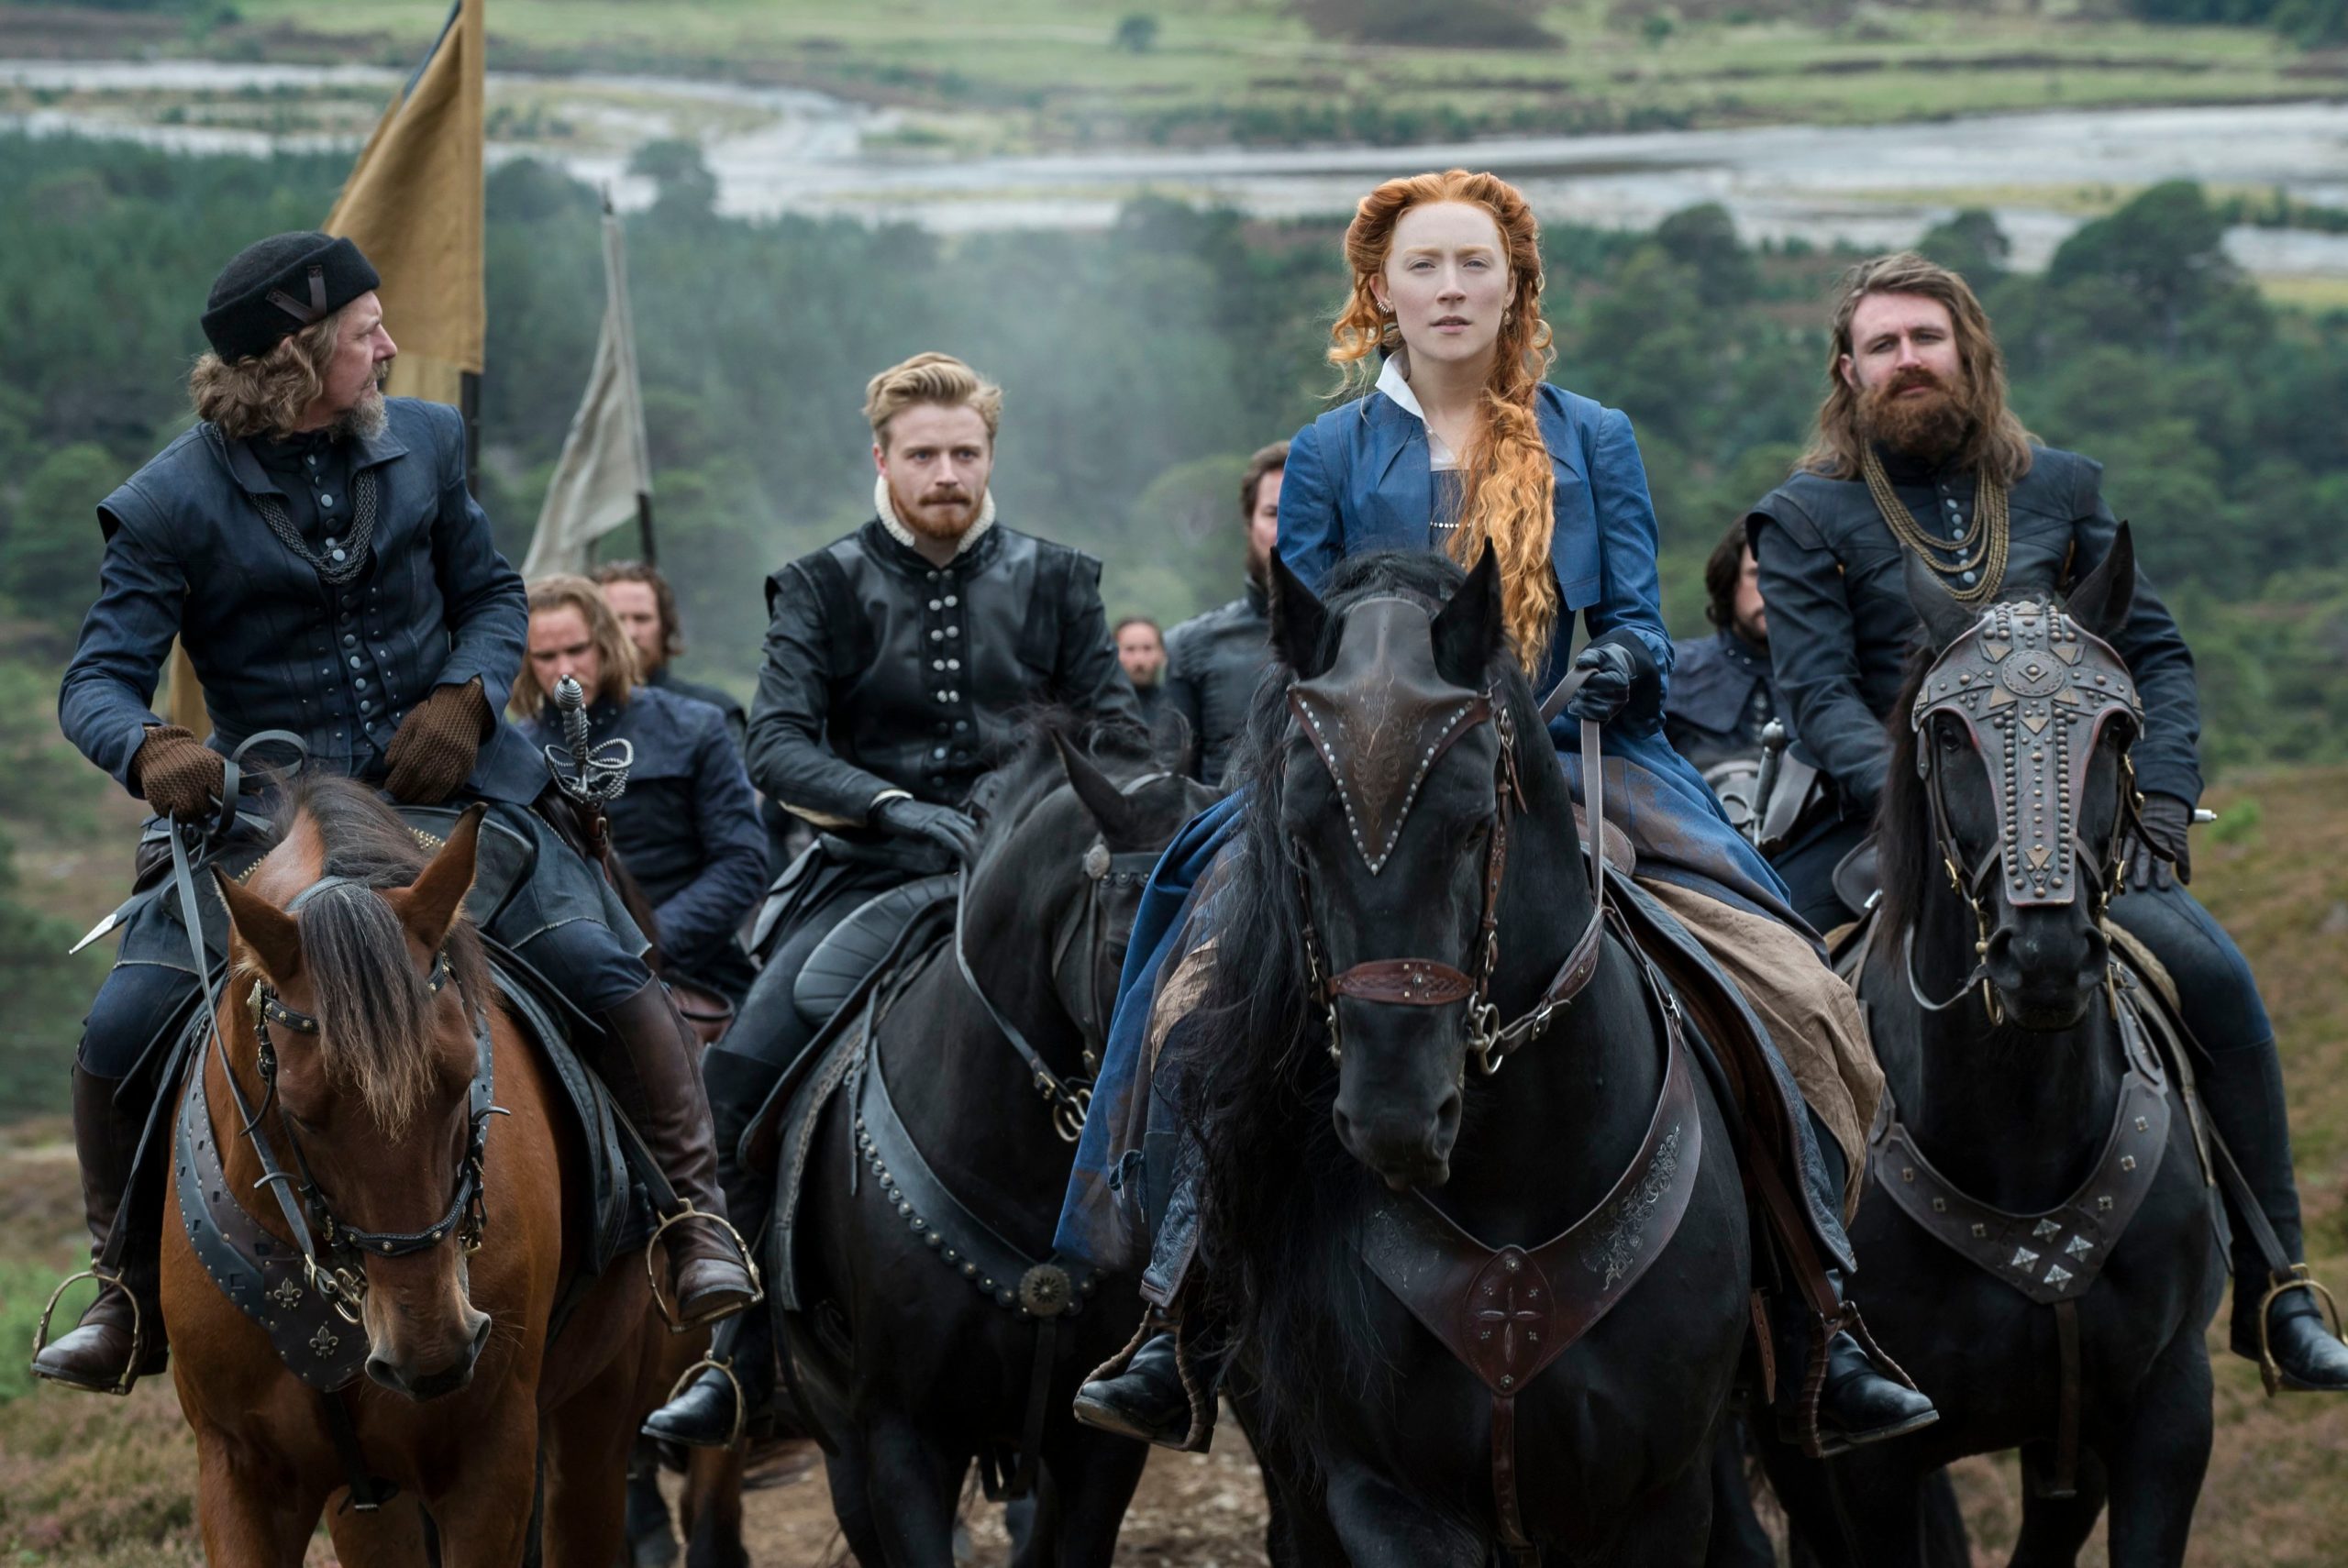 Actor Saoirse Ronan as Mary Queen of Scots in 2018 movie